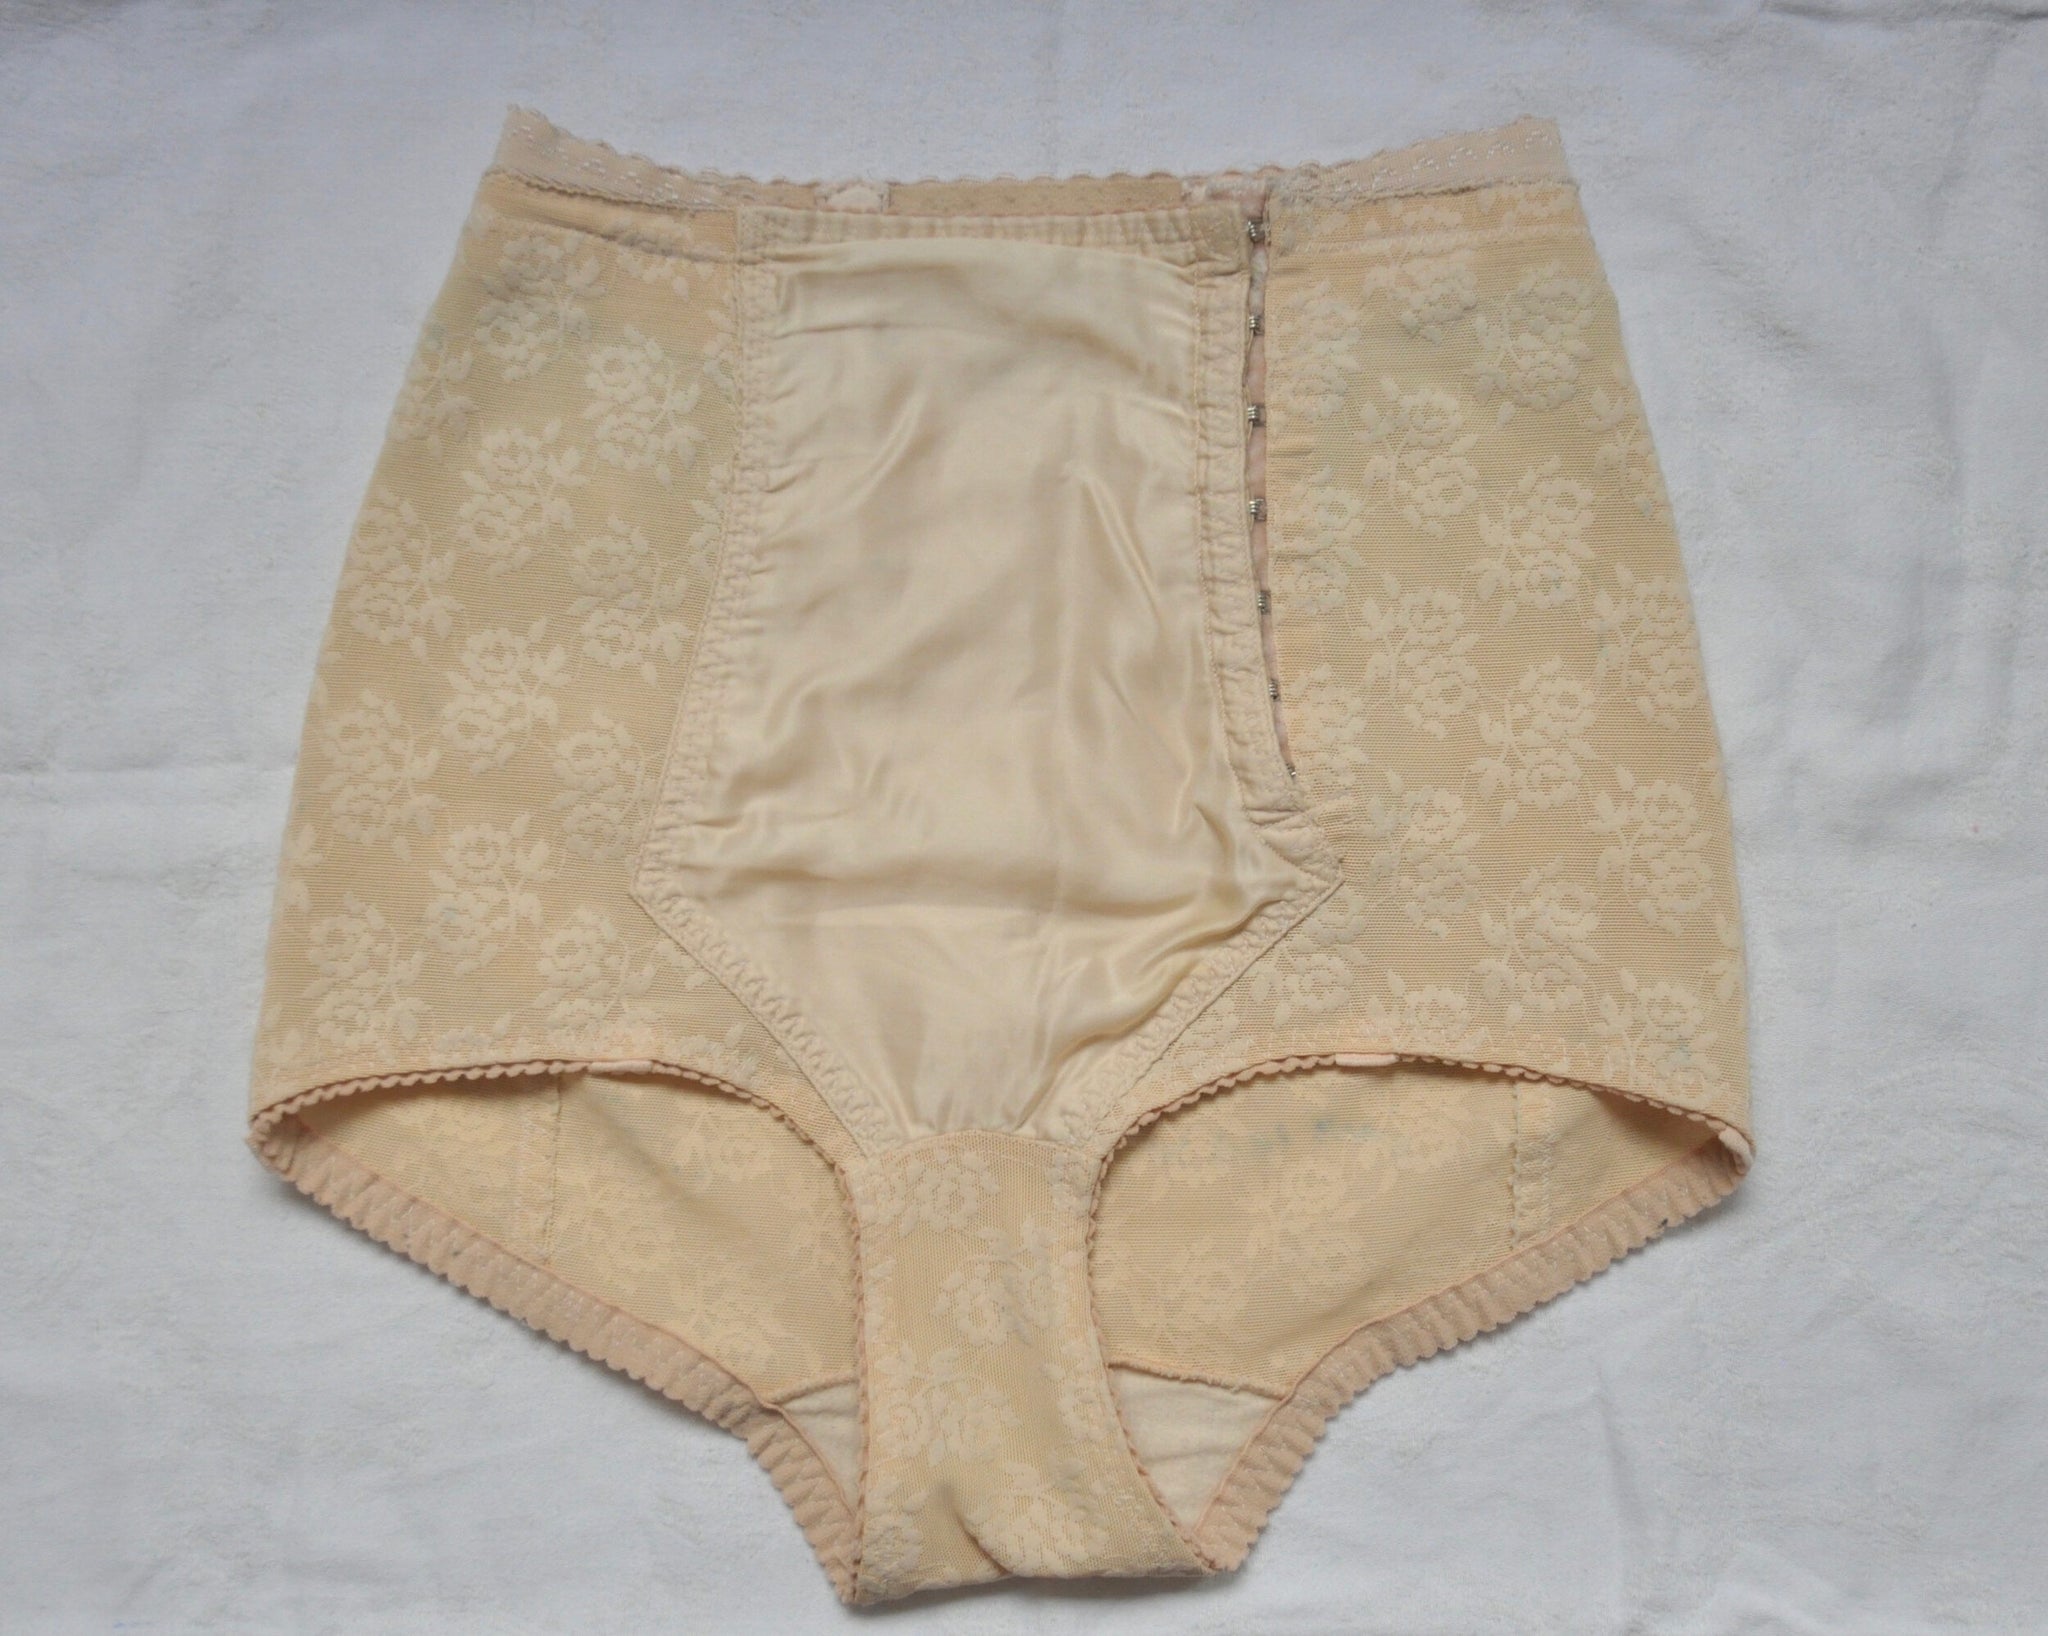 satin panty girdle products for sale